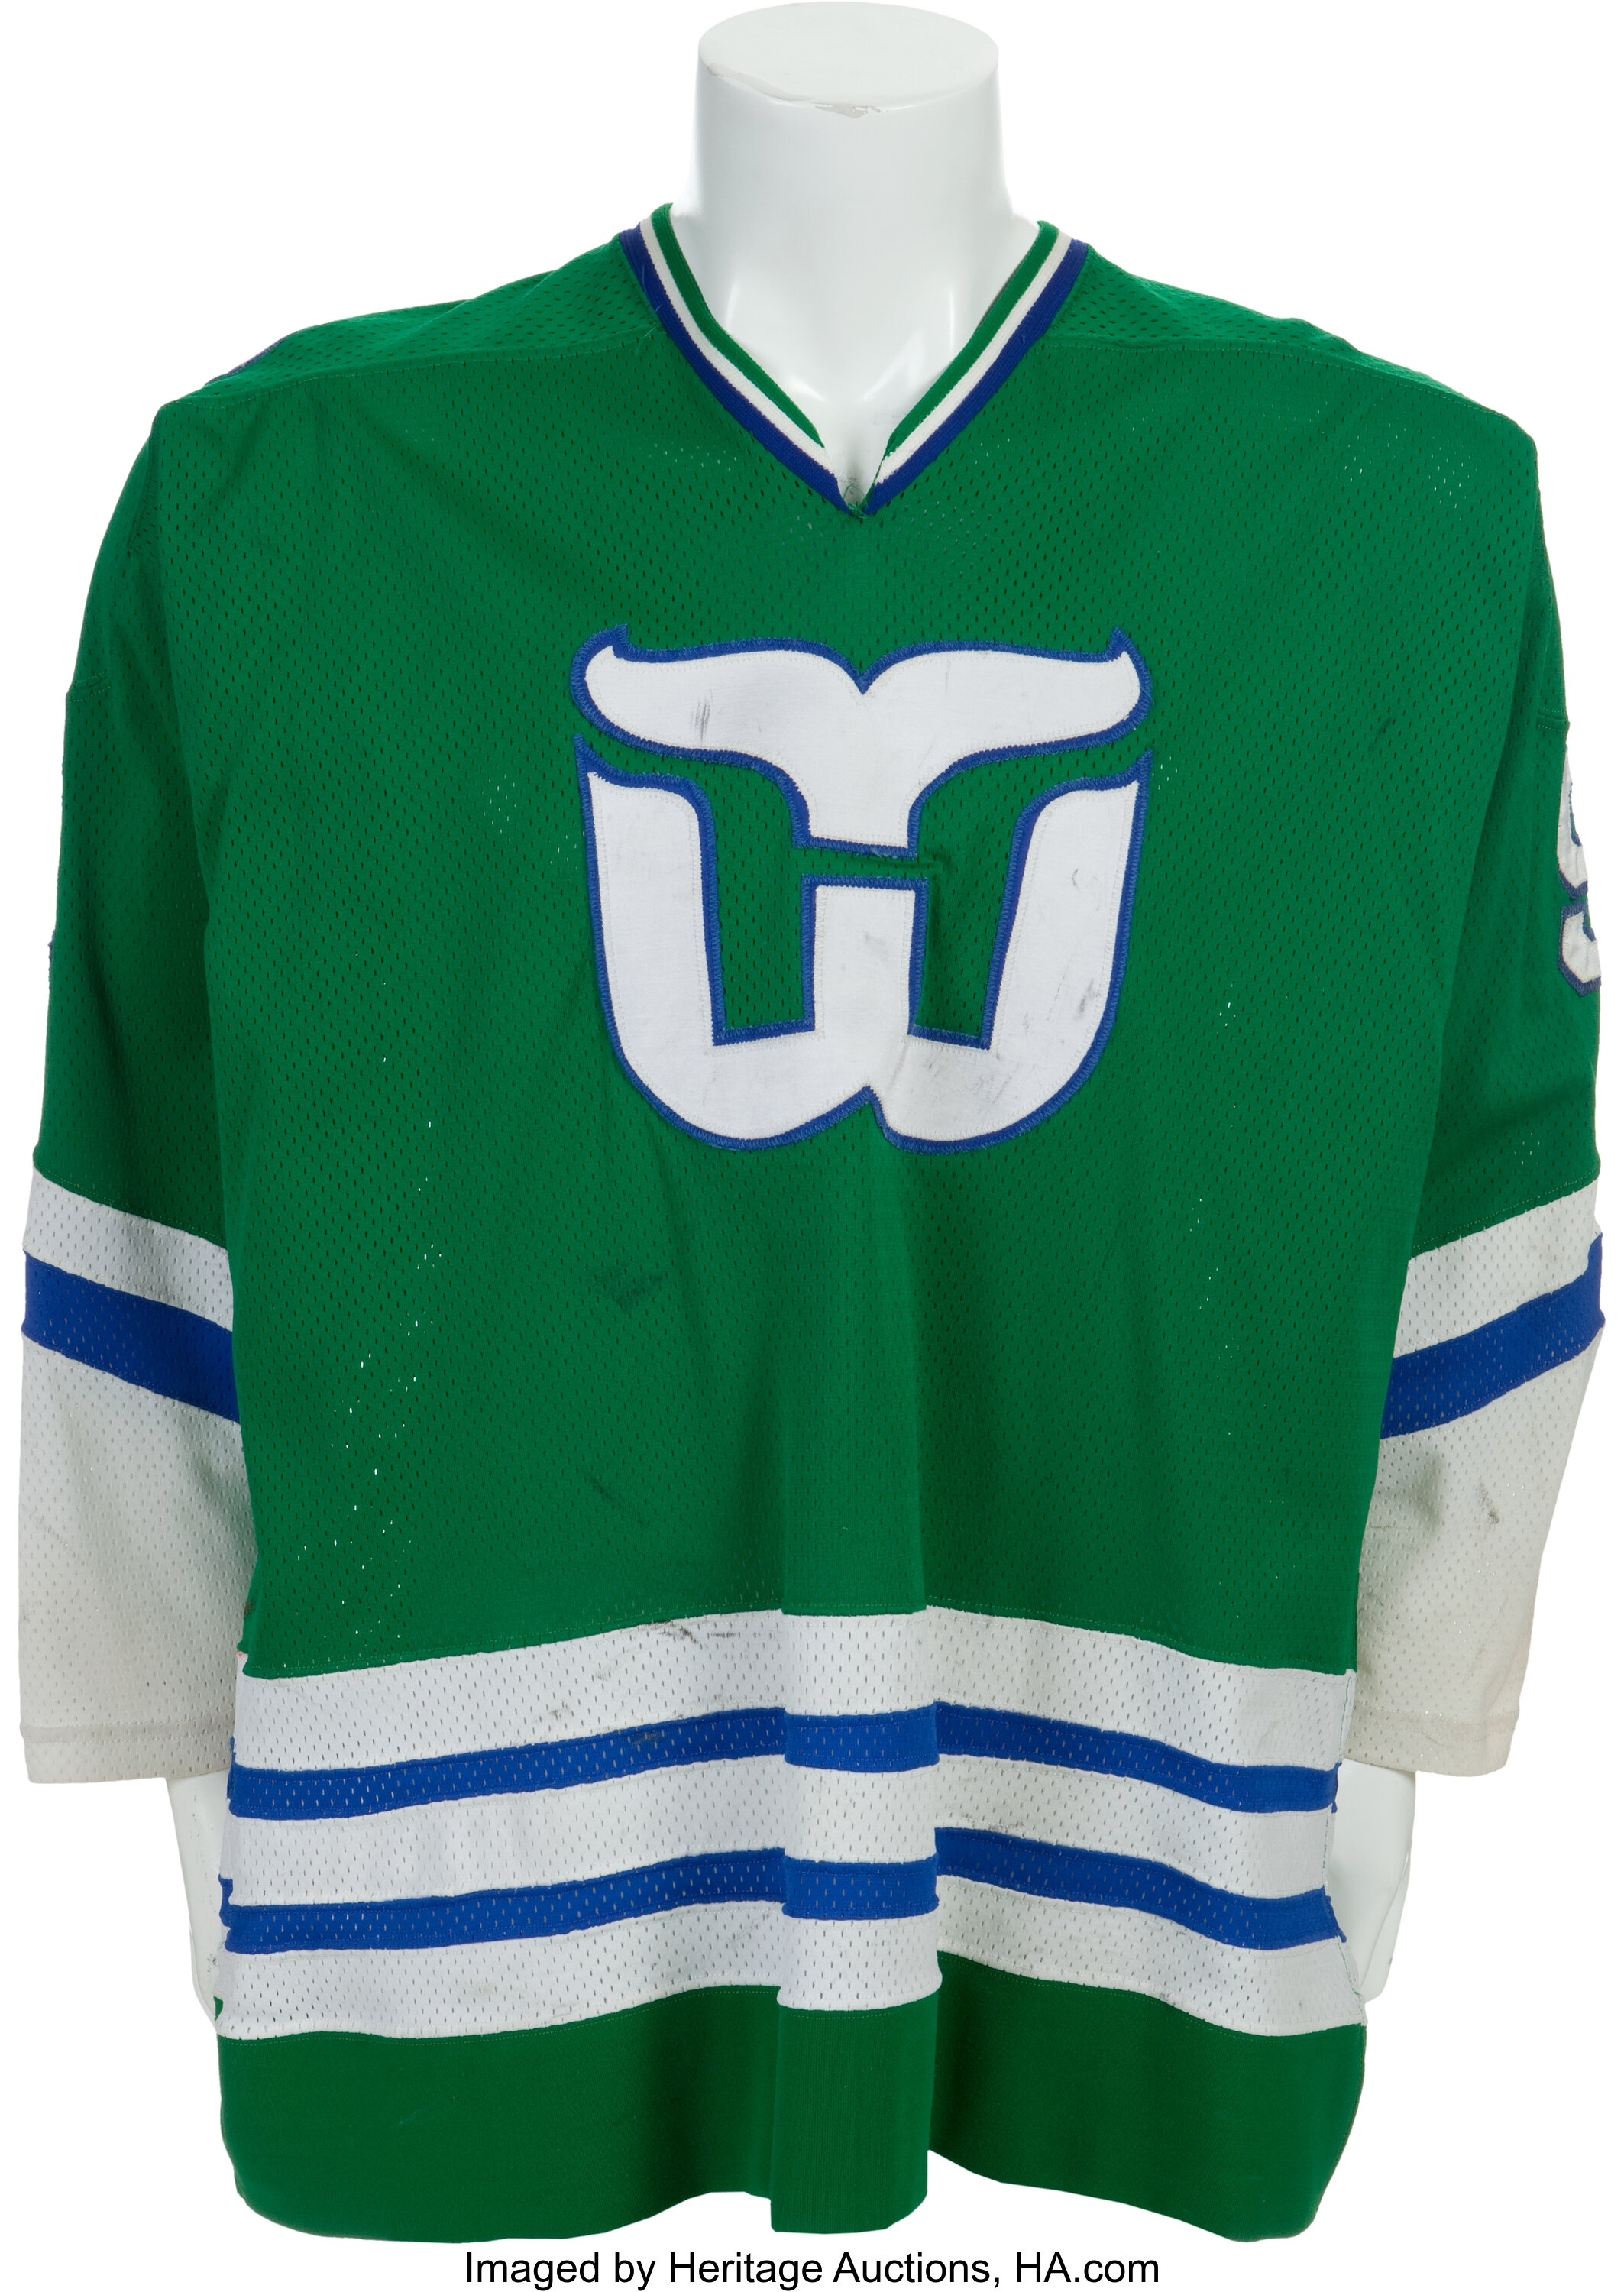 Green Whalers jerseys are 50% off at The Eye still. Had to grab